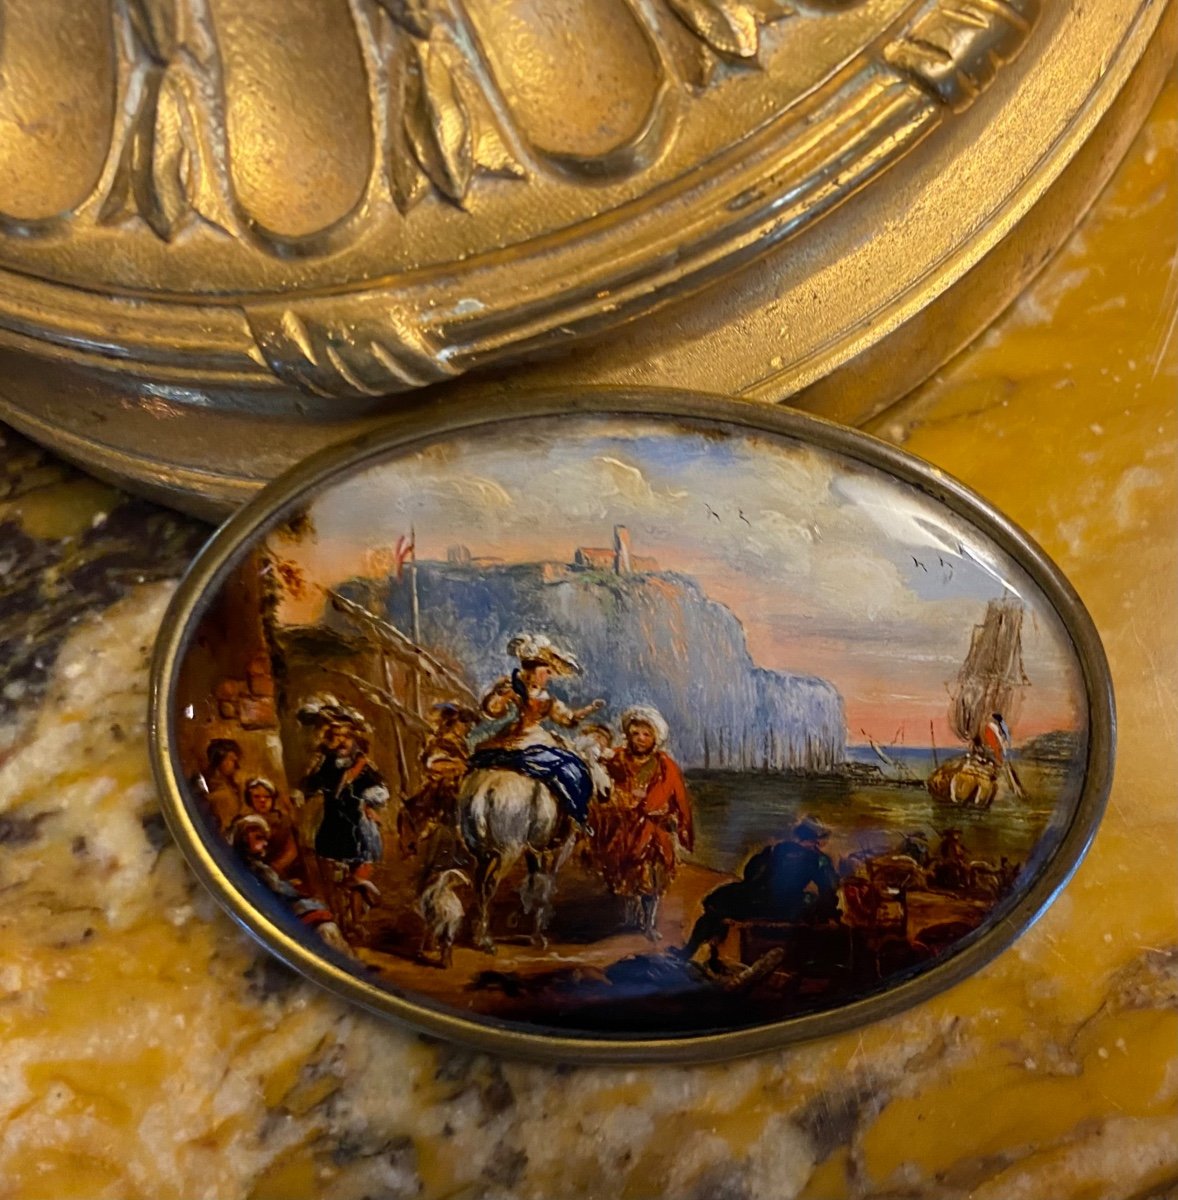 Charming Oval Miniature On Glass From The Beginning Of The 19th Century Representing A Horsewoman In Sidesaddle Near A Man In A Turban In A Lively Port Scene.-photo-2